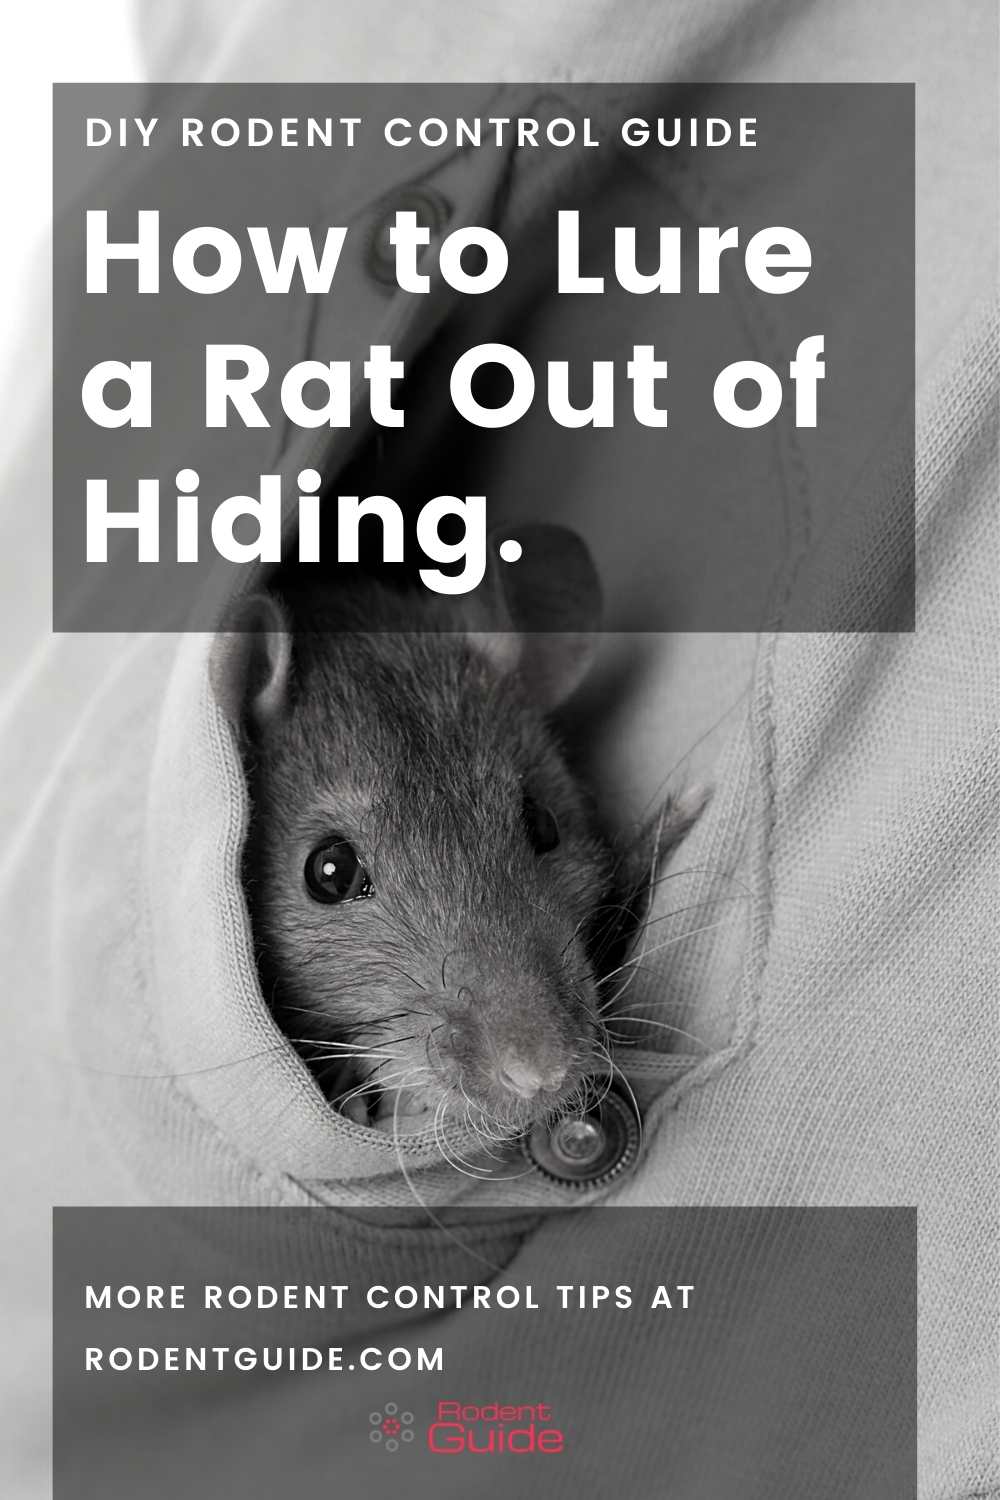 How to Lure a Rat Out of Hiding